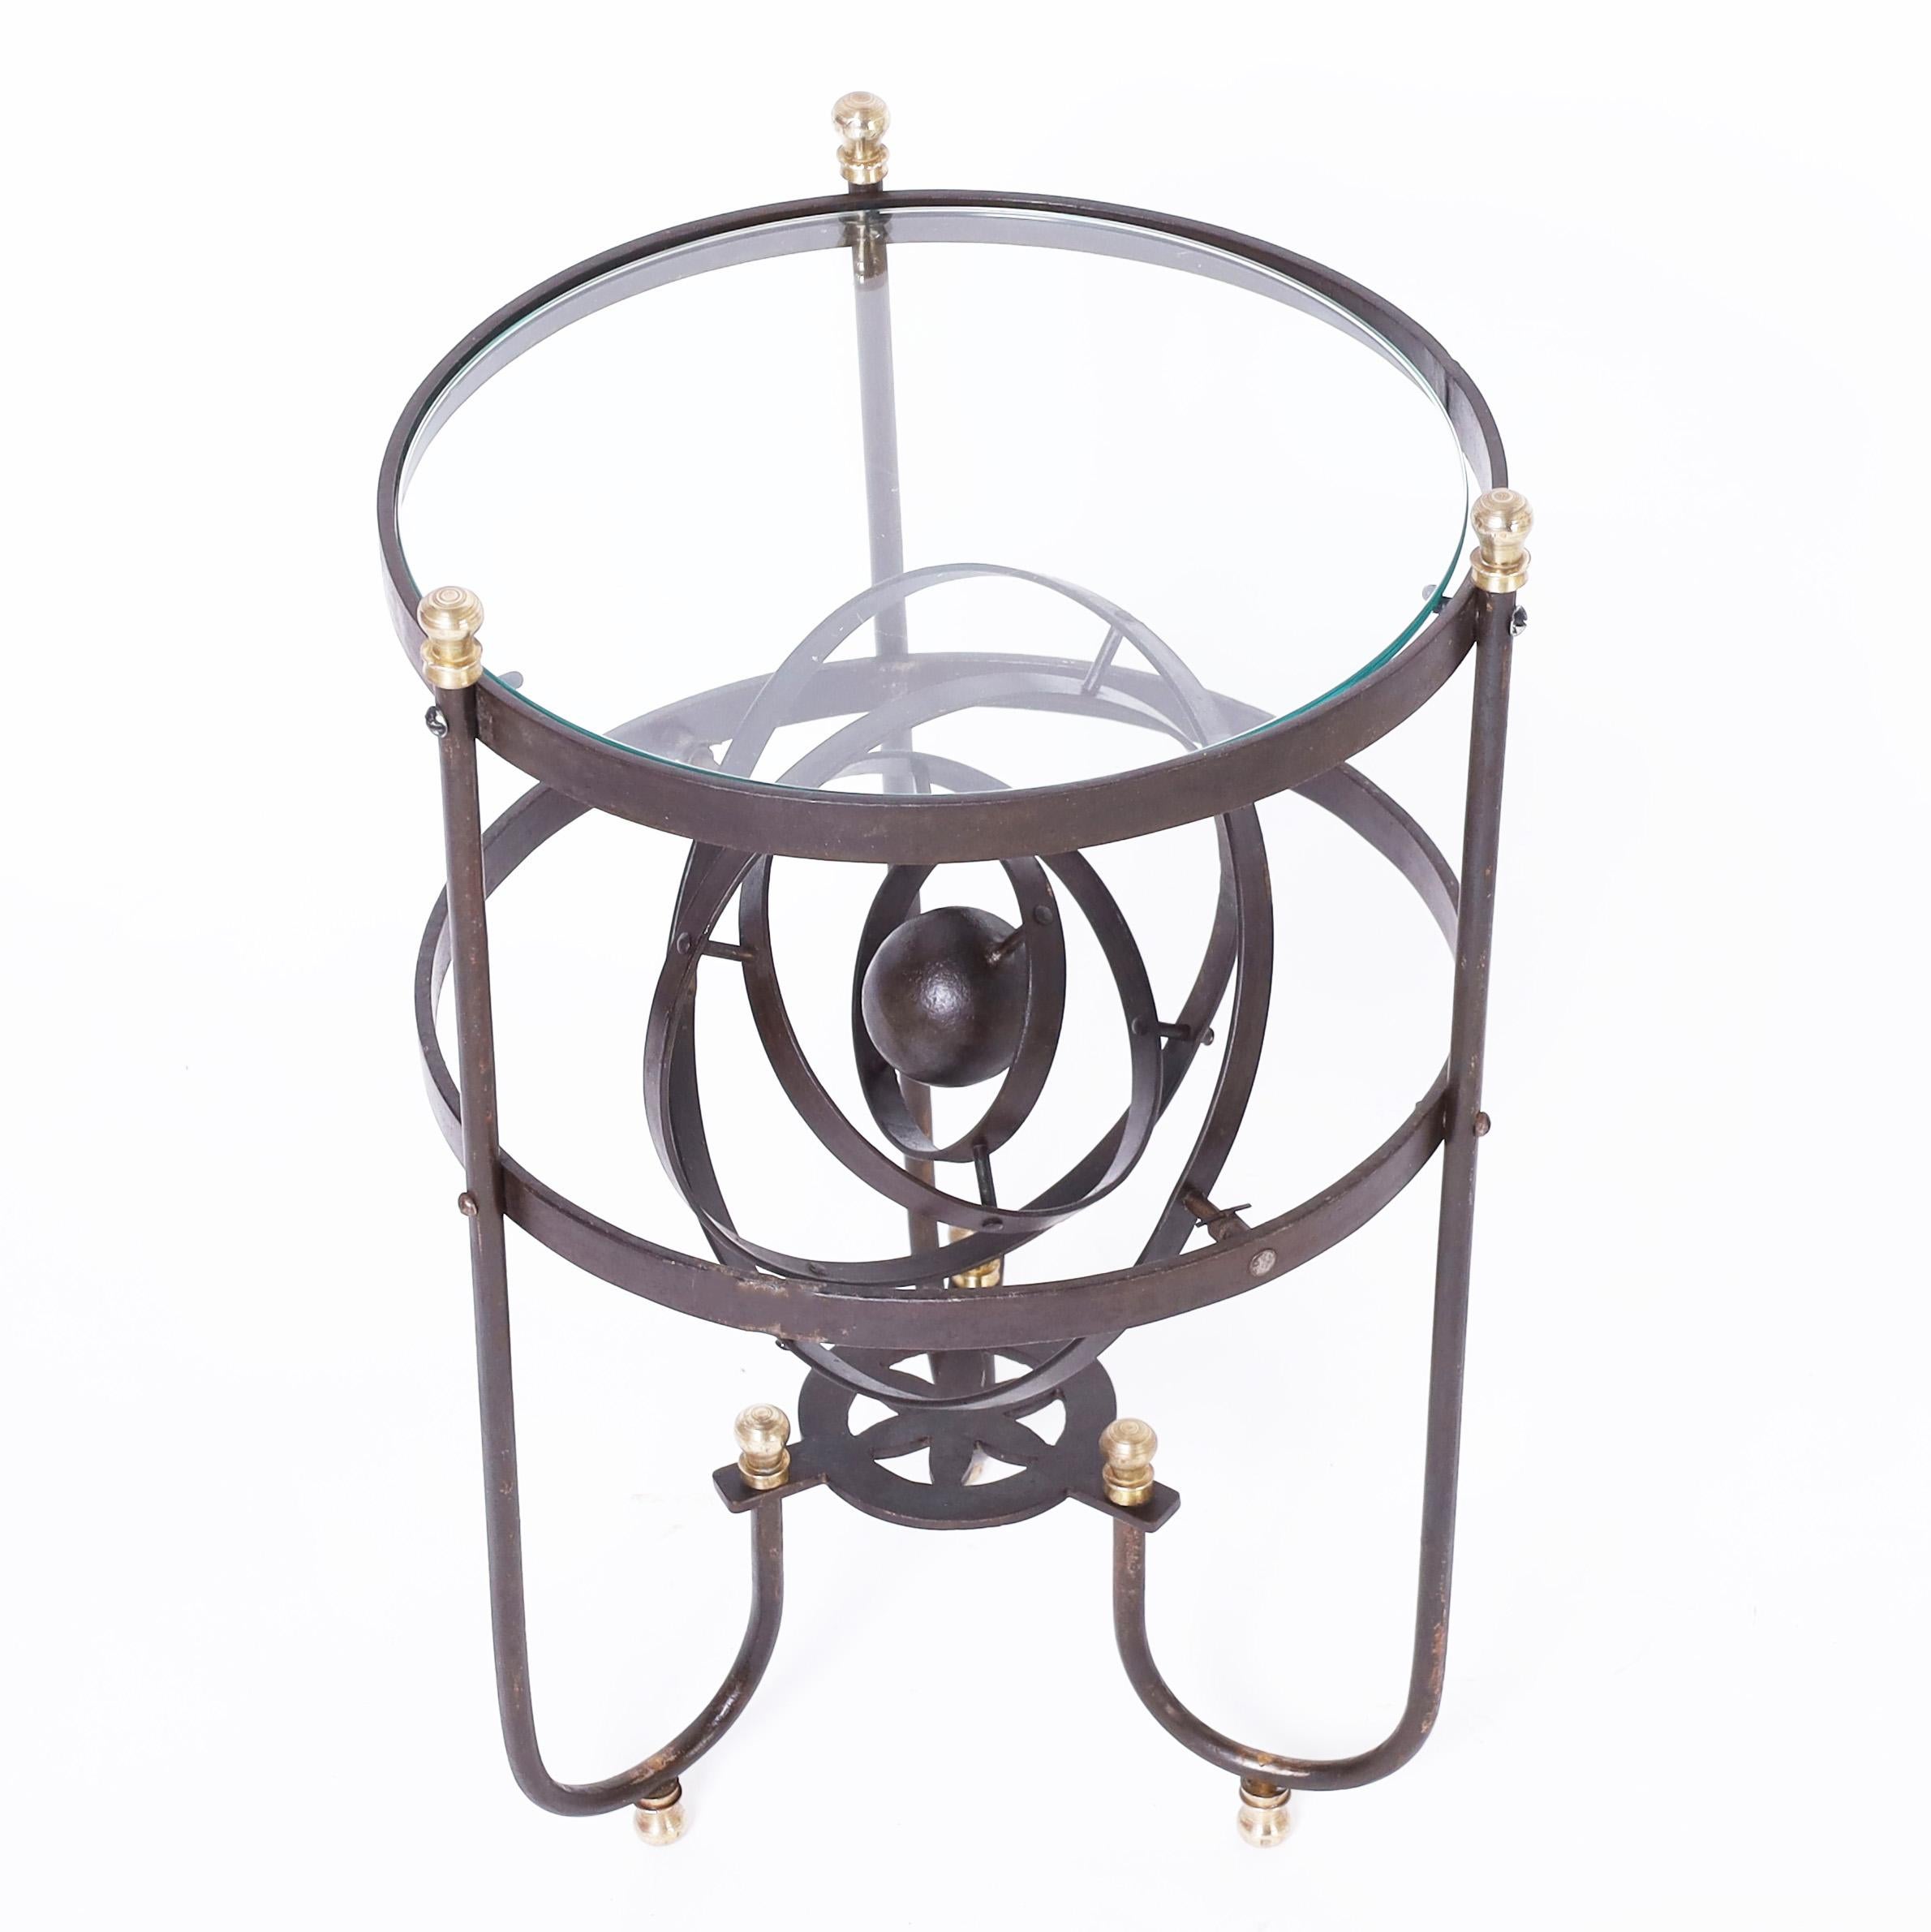 Unusual French glass top stand crafted in iron featuring a fully functioning armillary sphere and brass finials and feet. 